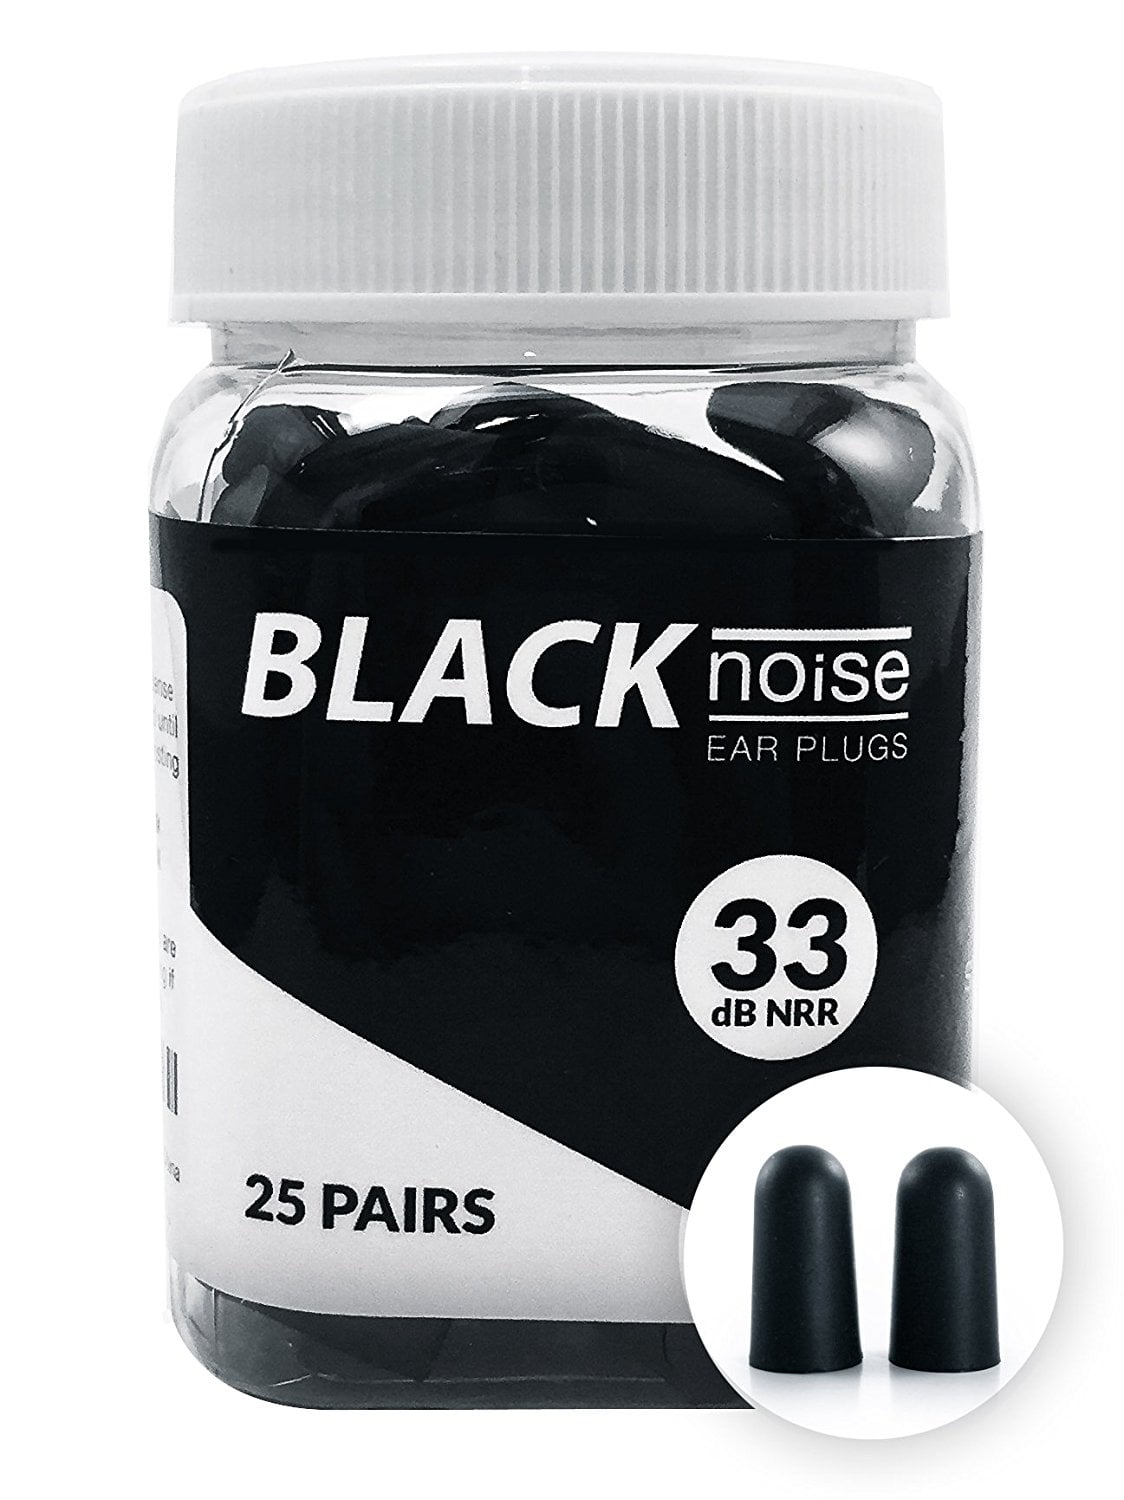 Soft and Durable Ear Black Noise Premium Ear Plugs33db NRR Noise Cancelling 